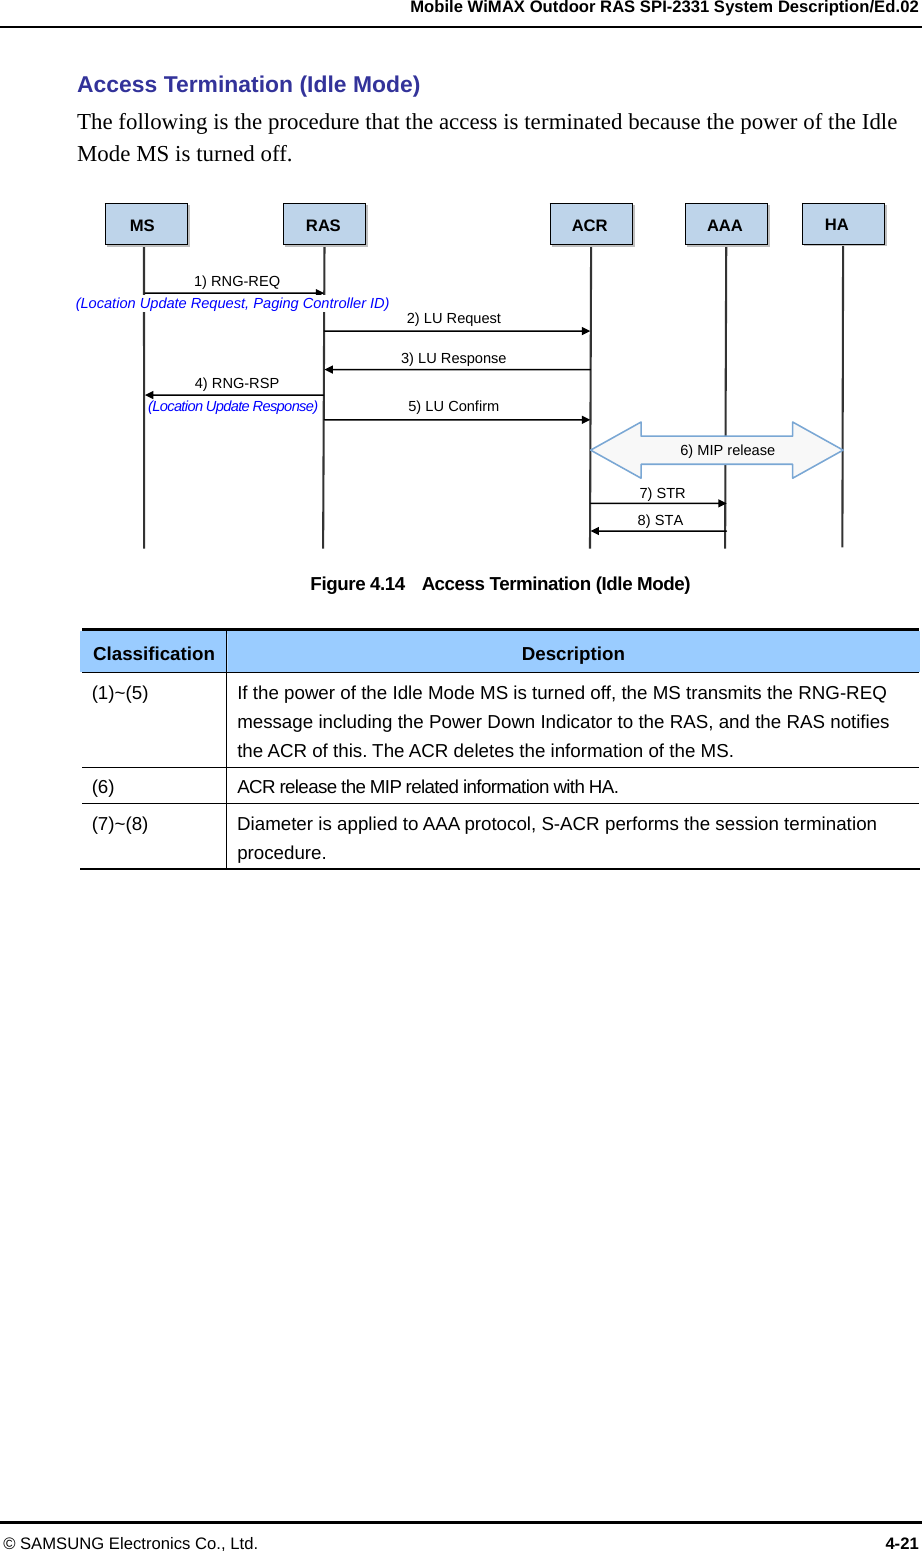   Mobile WiMAX Outdoor RAS SPI-2331 System Description/Ed.02 © SAMSUNG Electronics Co., Ltd.  4-21 Access Termination (Idle Mode) The following is the procedure that the access is terminated because the power of the Idle Mode MS is turned off.    Figure 4.14    Access Termination (Idle Mode)  Classification Description (1)~(5)  If the power of the Idle Mode MS is turned off, the MS transmits the RNG-REQ message including the Power Down Indicator to the RAS, and the RAS notifies the ACR of this. The ACR deletes the information of the MS.   (6)  ACR release the MIP related information with HA. (7)~(8)  Diameter is applied to AAA protocol, S-ACR performs the session termination procedure.  MS  RAS ACR1) RNG-REQ (Location Update Request, Paging Controller ID)  2) LU Request 4) RNG-RSP (Location Update Response) 3) LU Response 5) LU Confirm AAA 7) STR 8) STA HA 6) MIP release 